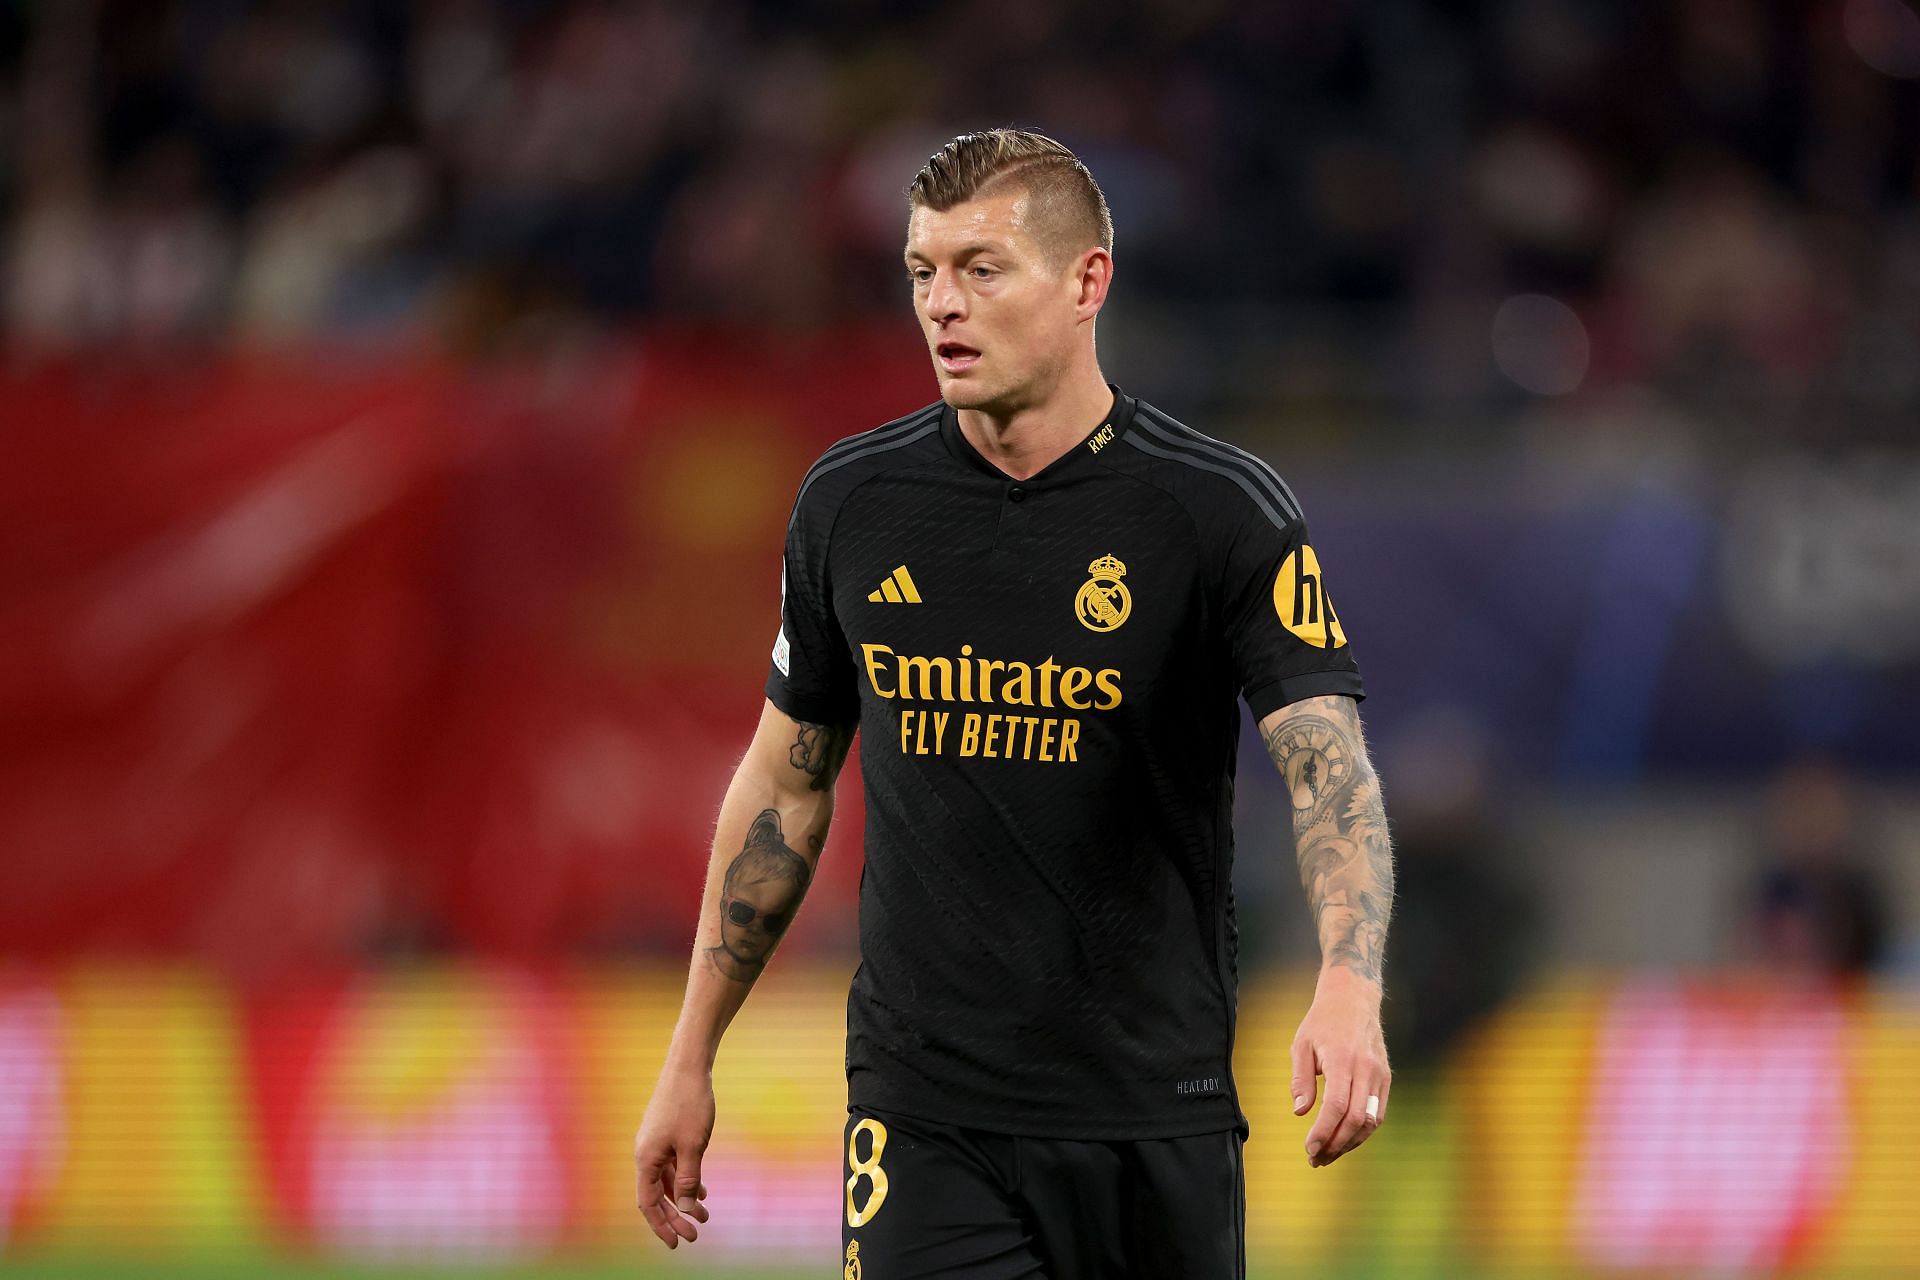 Toni Kroos&rsquo; future at the Santiago Bernabeu remains up in the air.